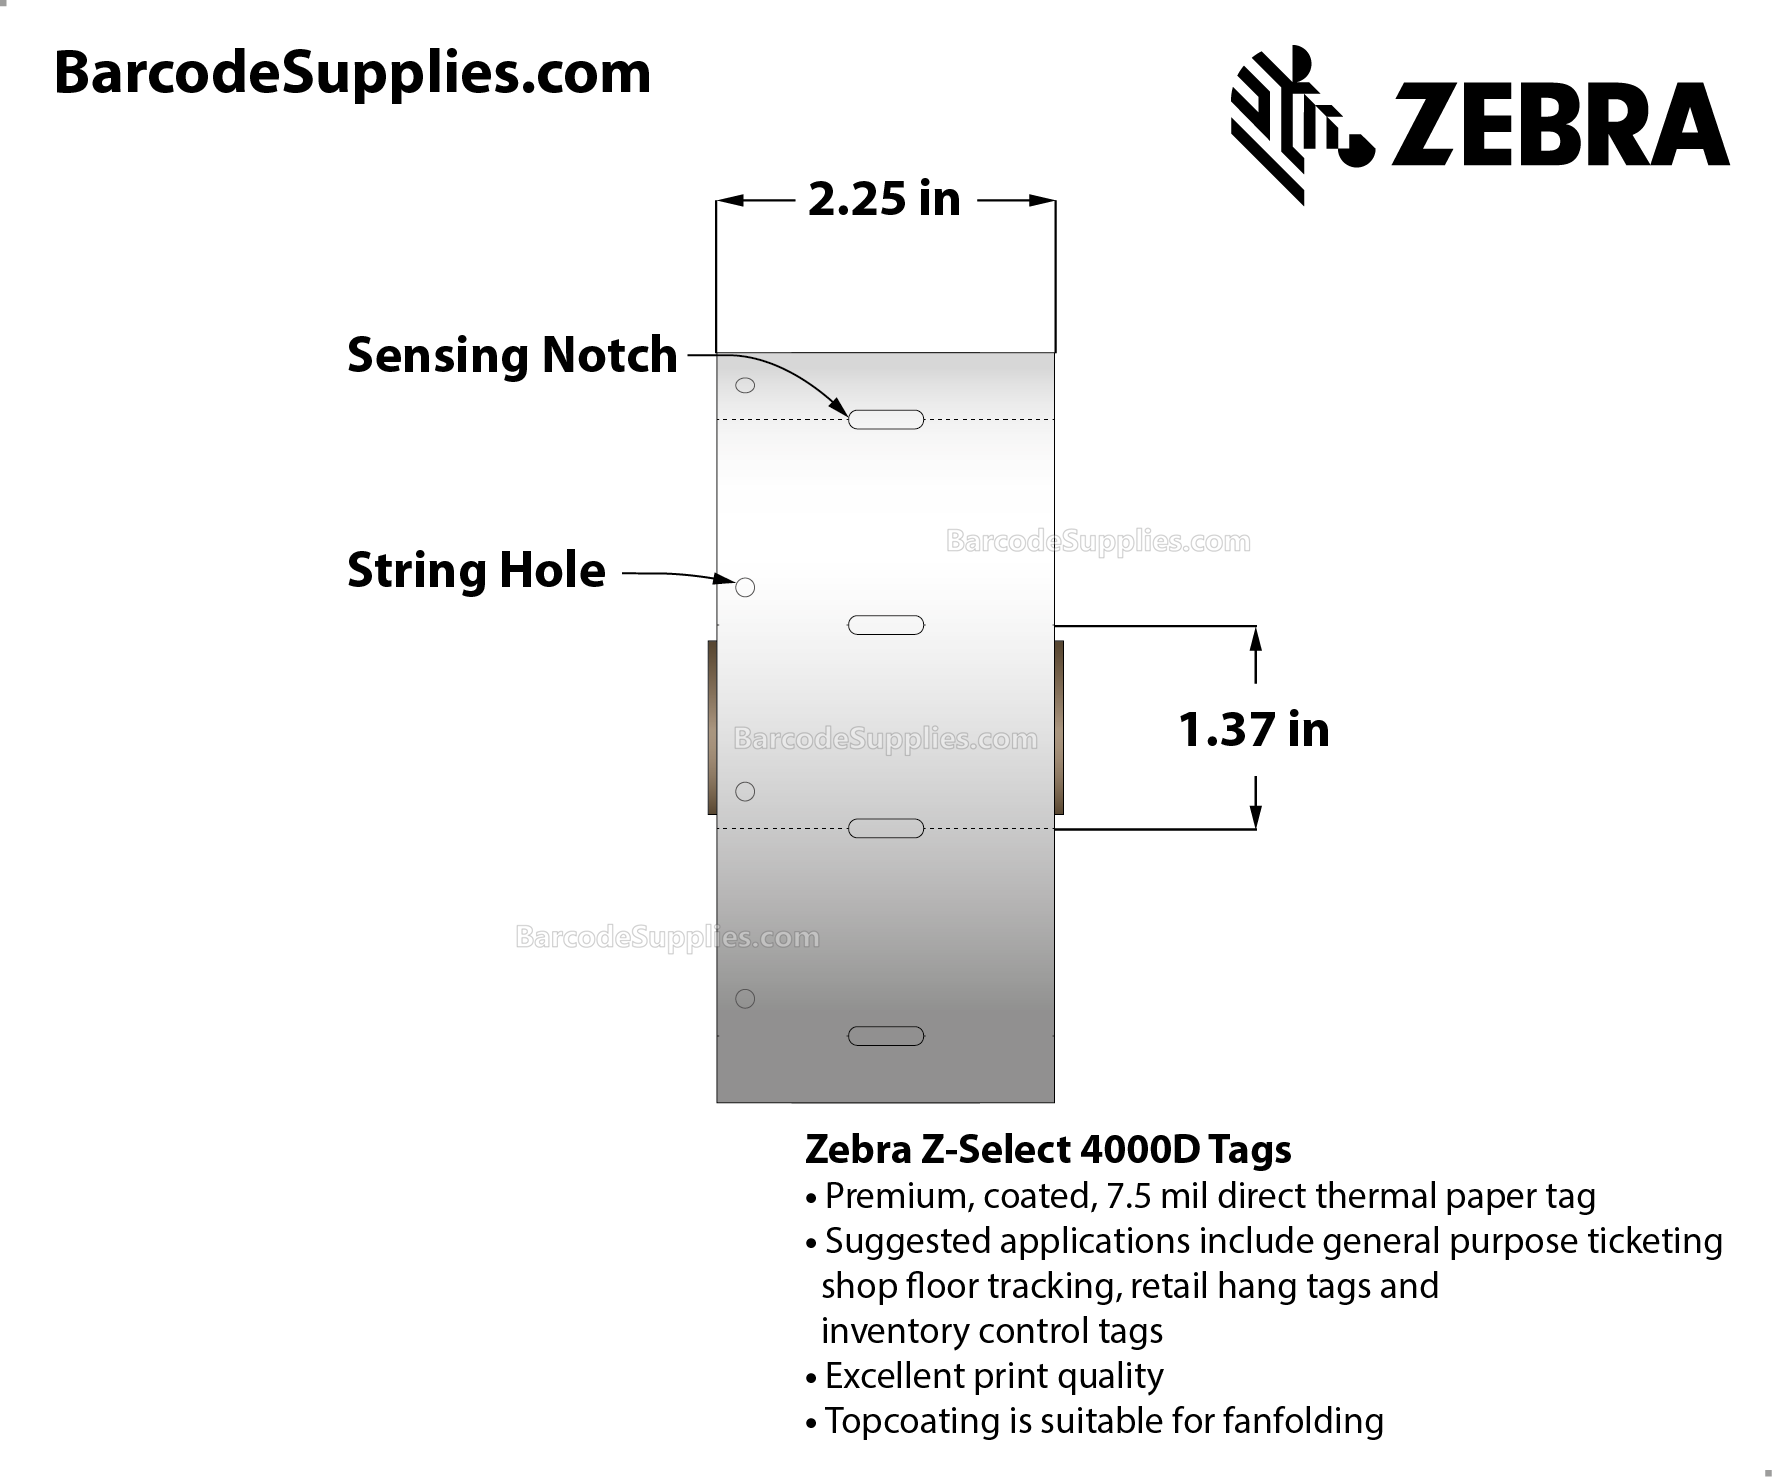 2.25 x 1.37 Direct Thermal White Z-Select 4000D 7 mil Tag Tags With No Adhesive - Contains sensing notch and stringhole - Perforated - 1600 Tags Per Roll - Carton Of 6 Rolls - 9600 Tags Total - MPN: 10010054